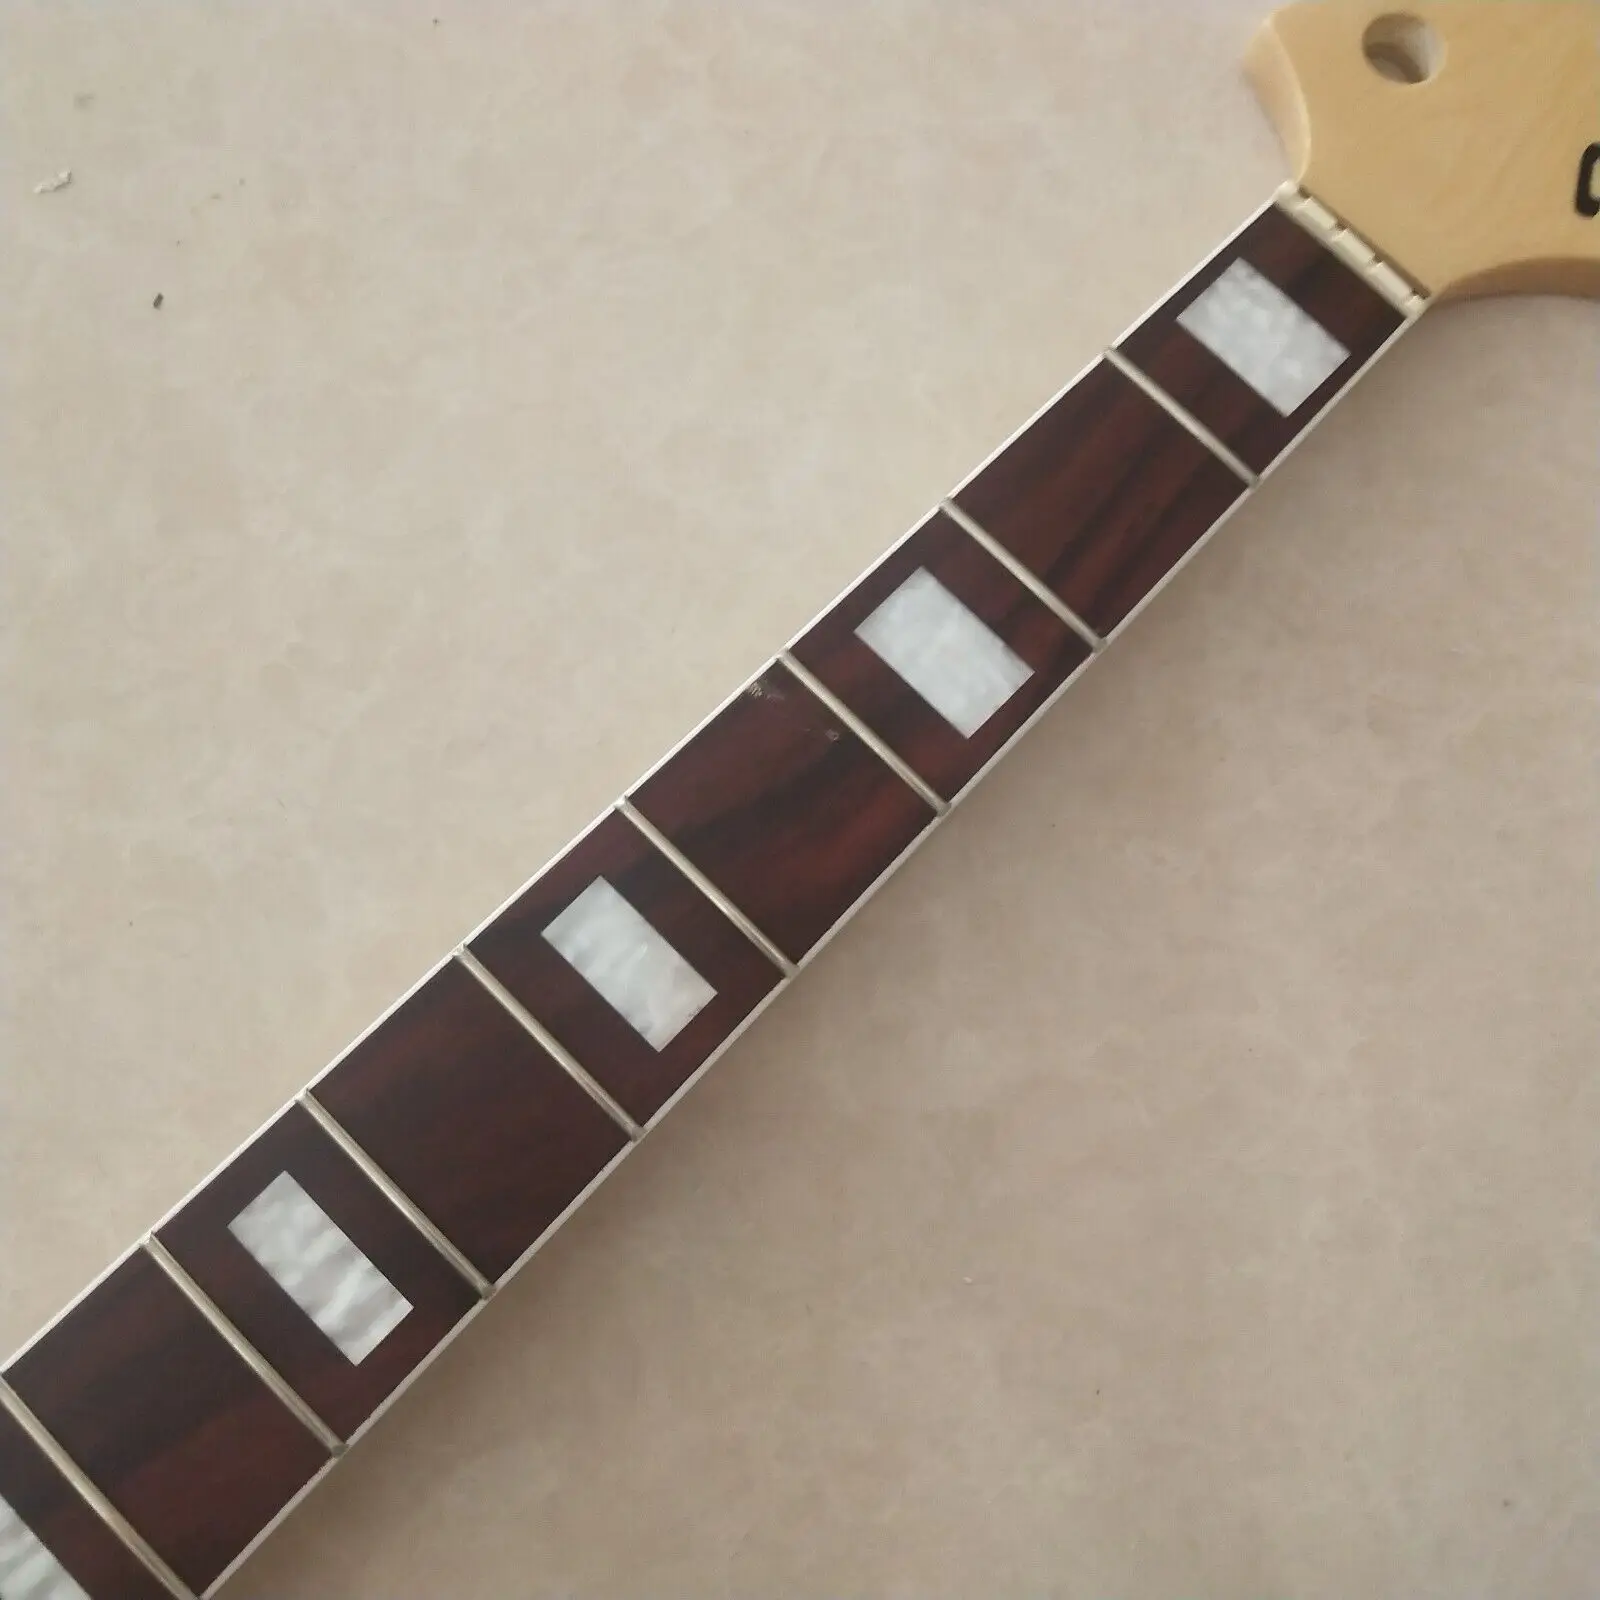 Replace Jazz bass guitar neck parts 20fret 34inch Rosewood Fretboard Block Inlay enlarge